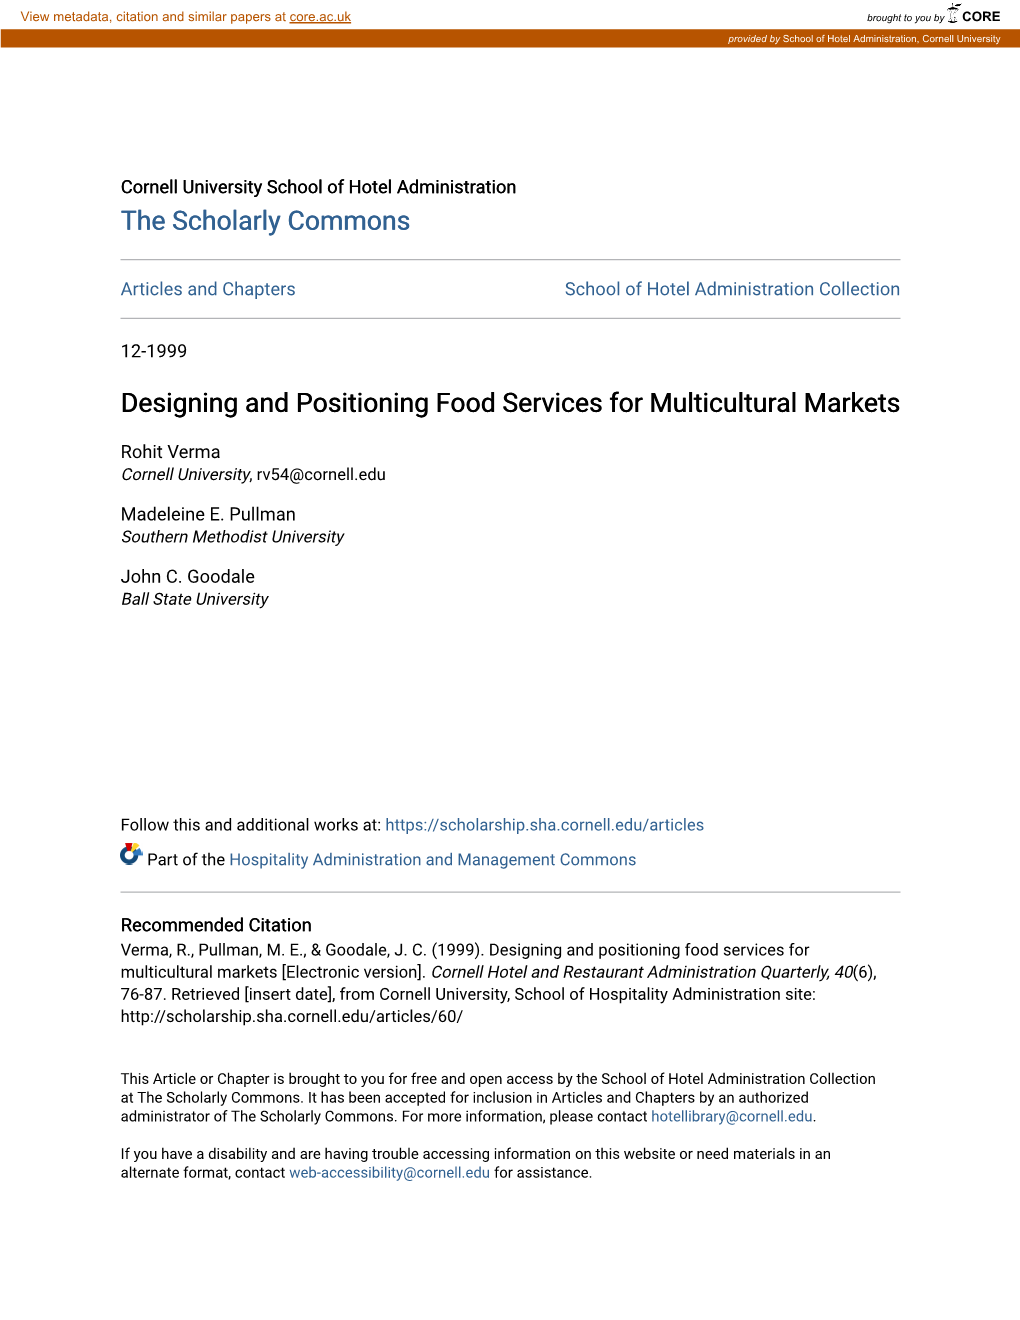 Designing and Positioning Food Services for Multicultural Markets